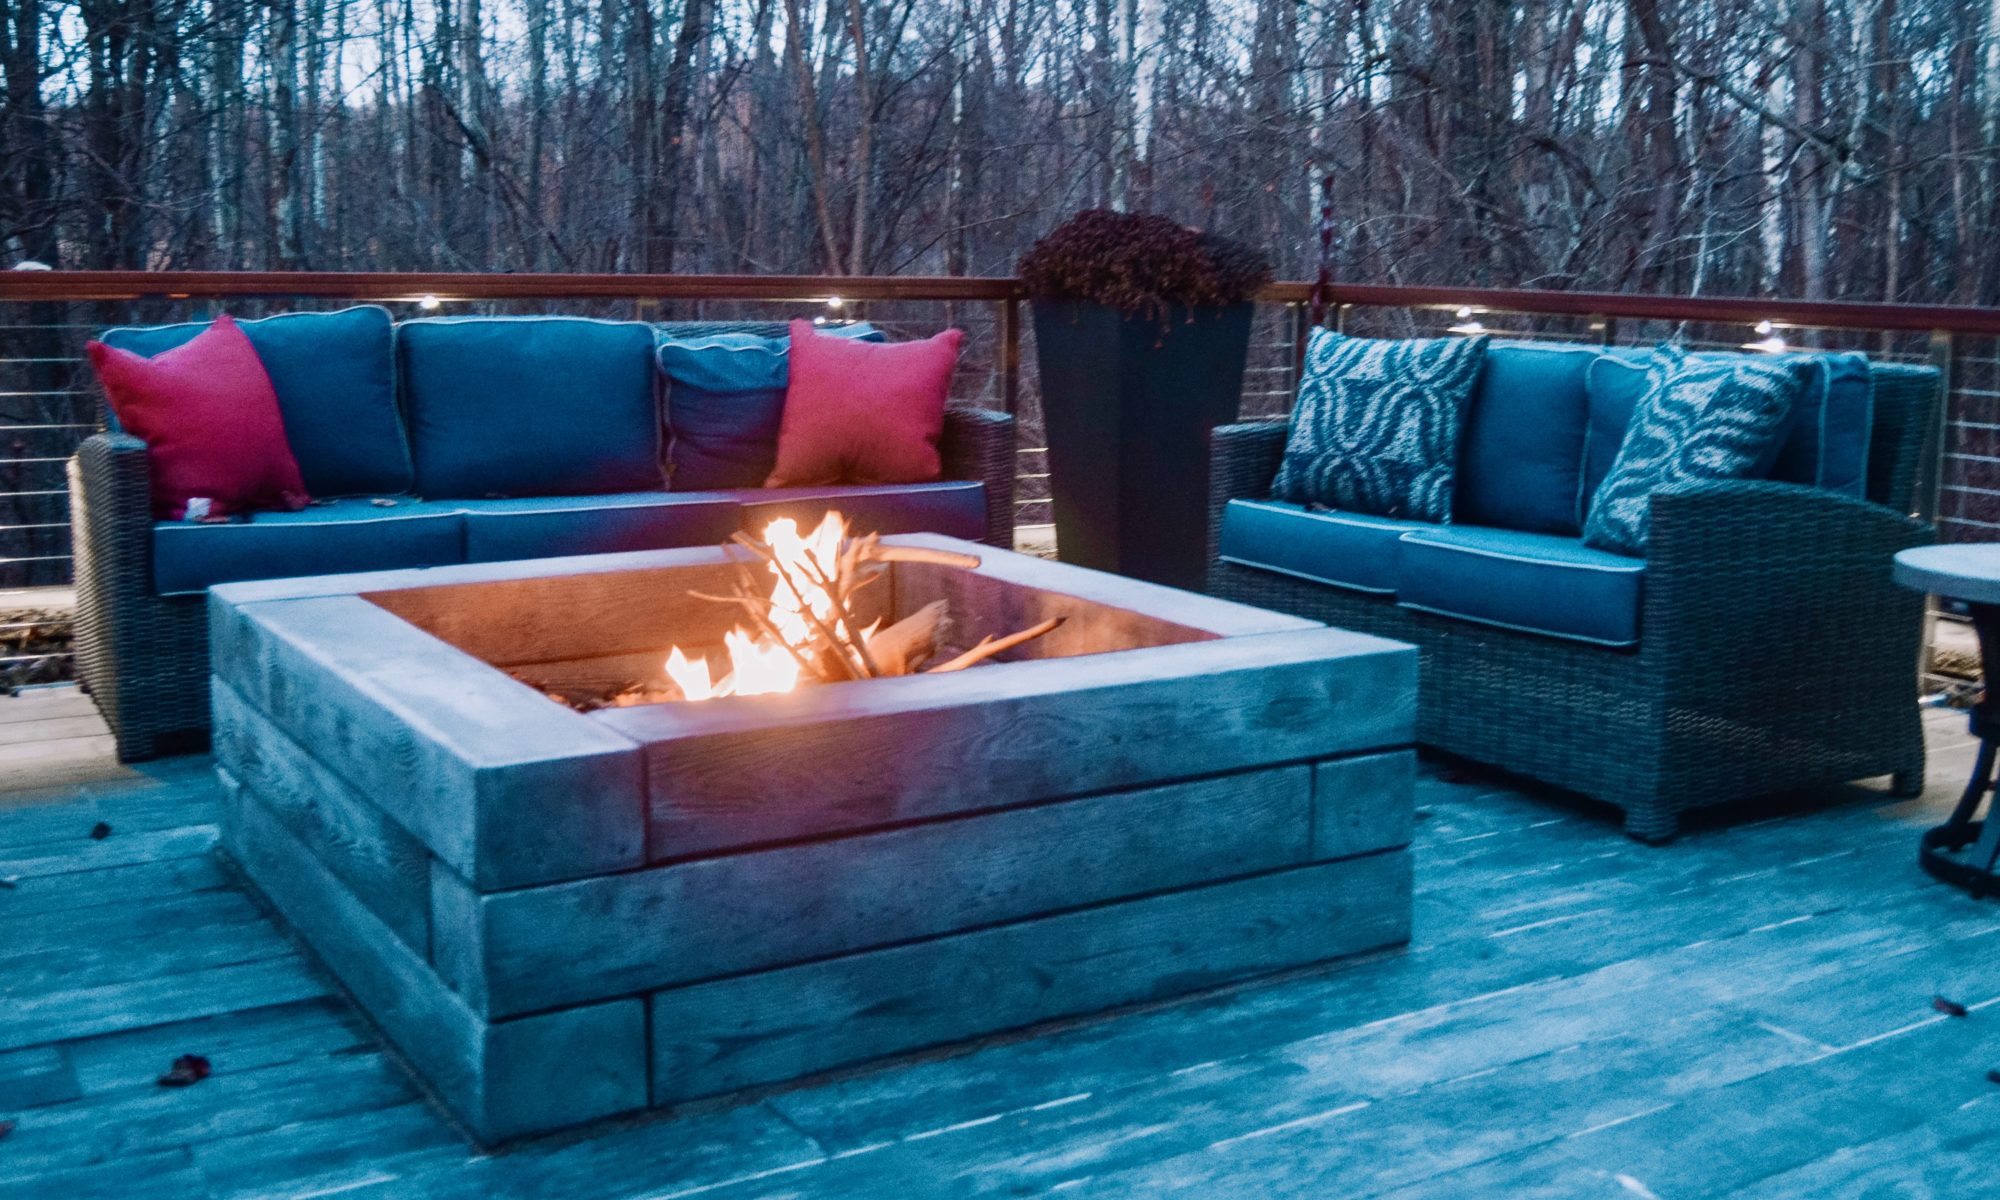 Twighlight Precision Avon Outdoors Indiana Fire Pit Exterior Design Indianapolis Indiana Exteriors Outdoor Living